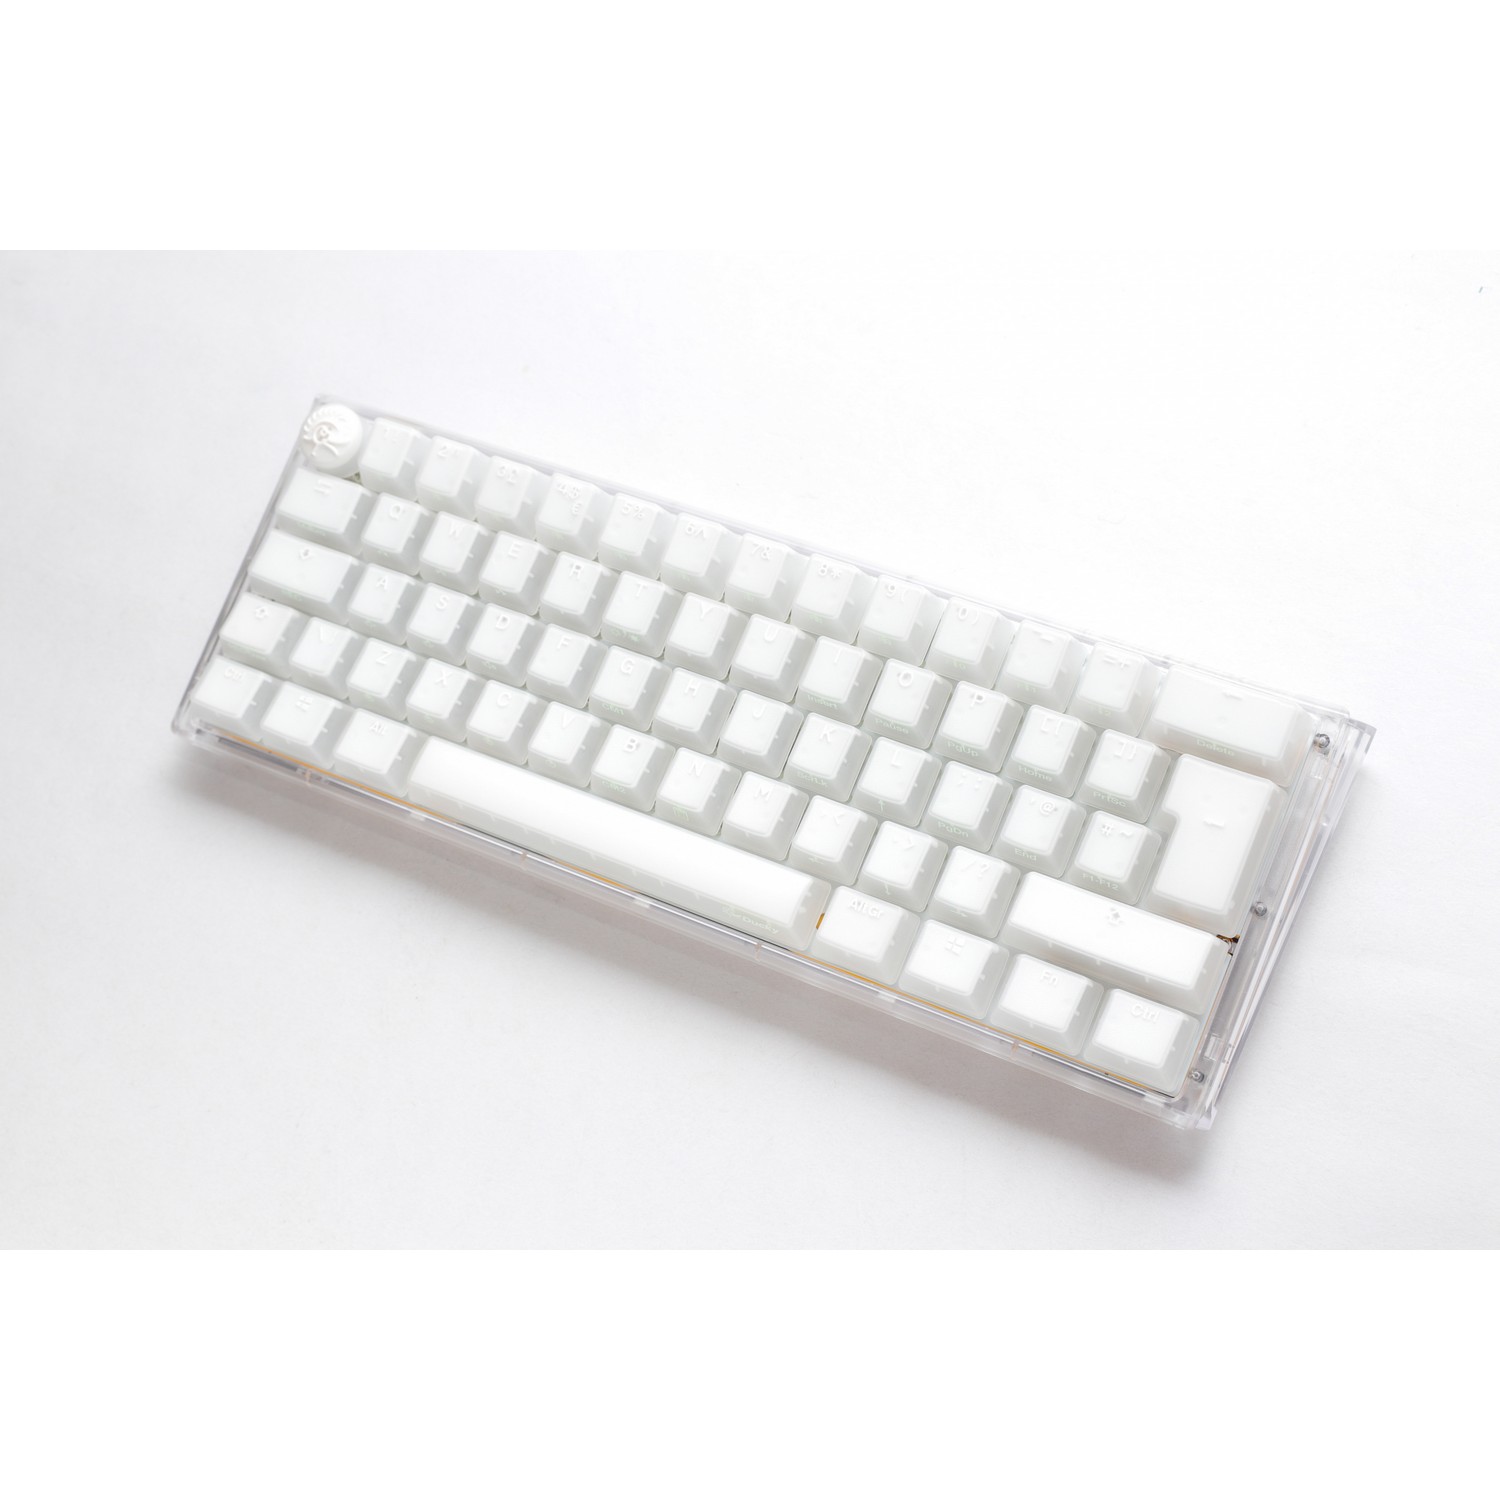 Ducky - Ducky One 3 Aura Mini 60% Mechanical Gaming Keyboard White Frame UK Layout Kailh Box Jellyfish Switch Y